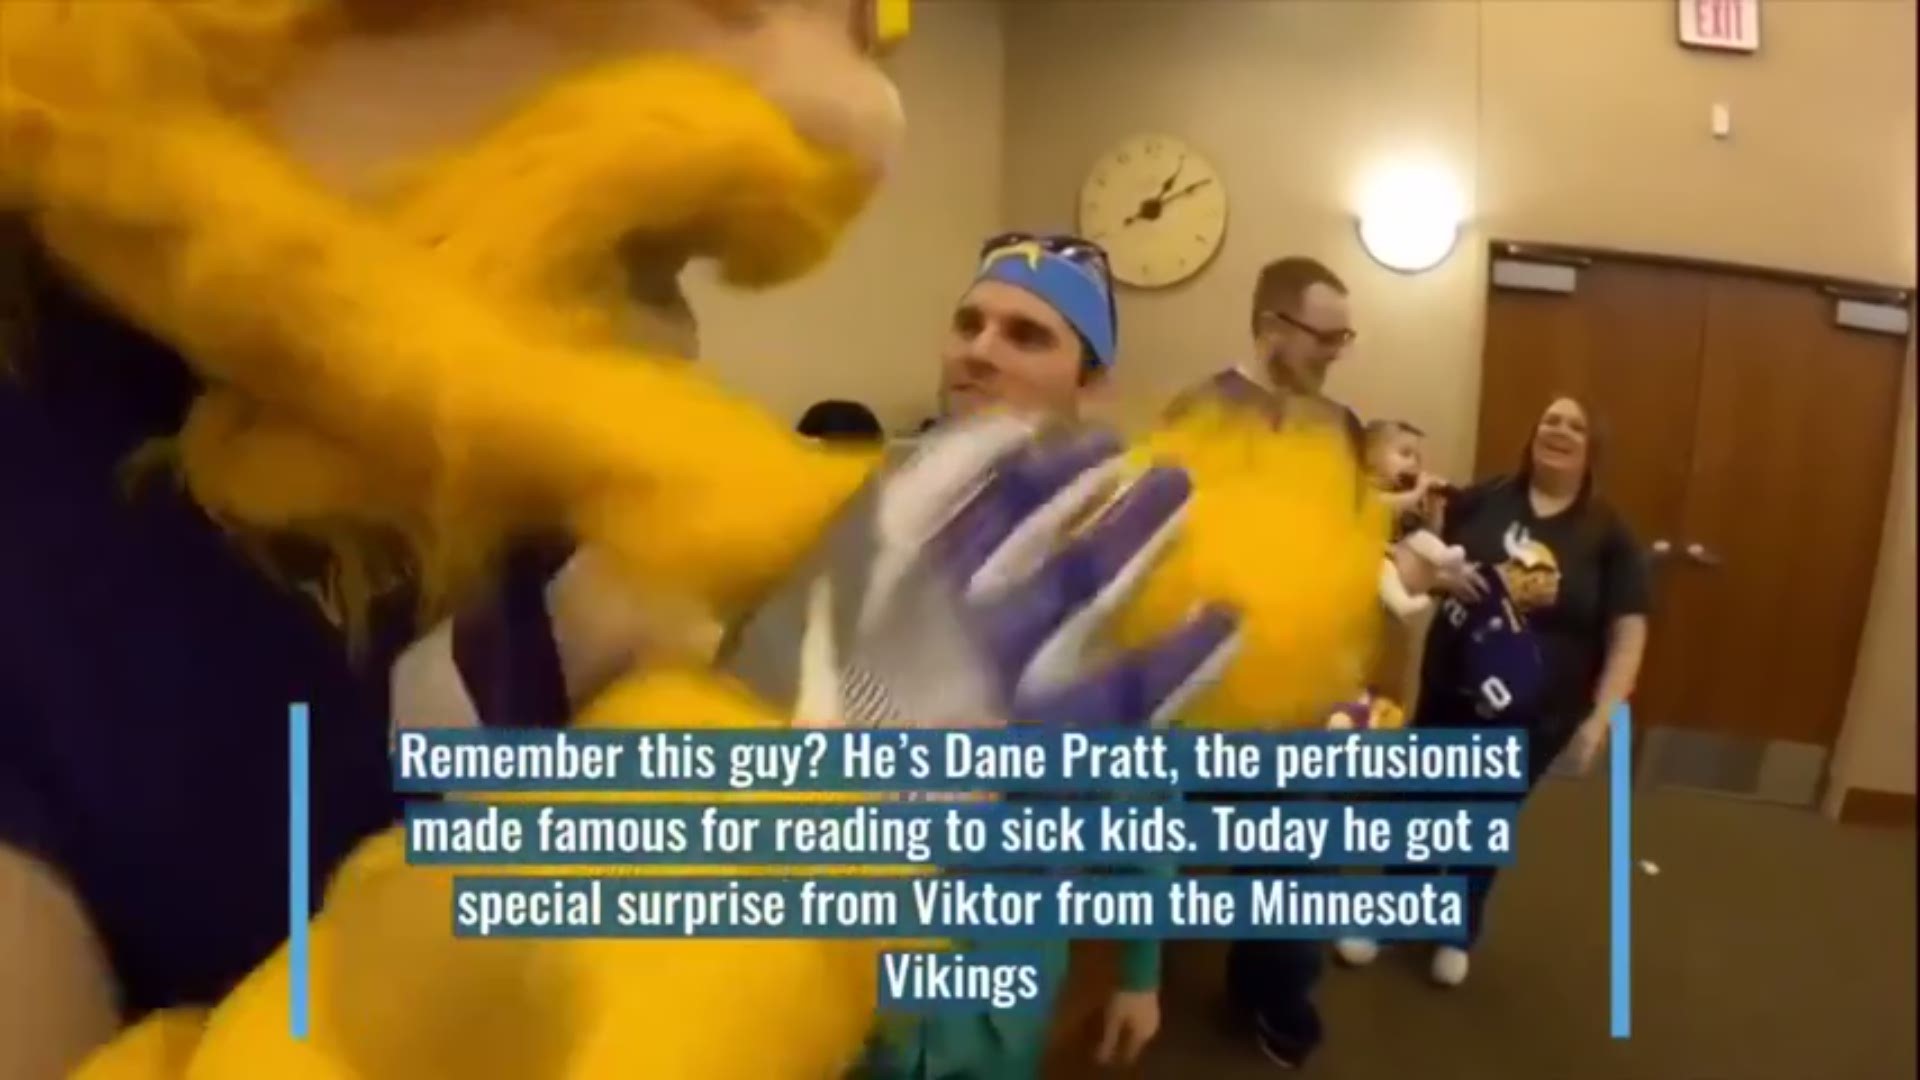 Perfusionist Dane Pratt was awarded sideline tickets to a Vikings game in the fall as a thank-you for all he does for children